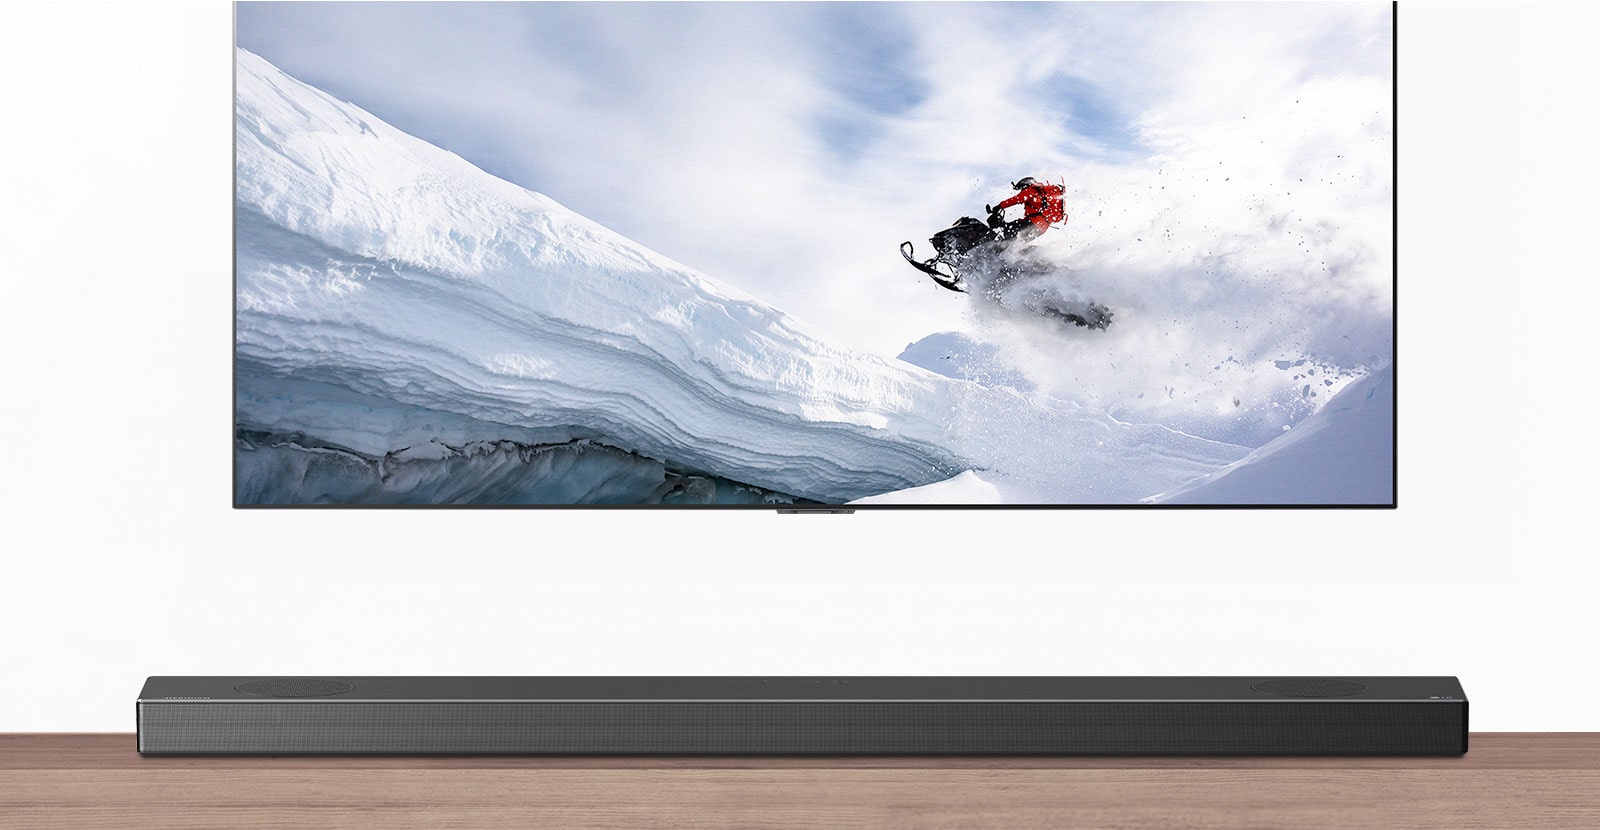 TV and Soundbar are seen from the front. TV shows man riding snowmobile in the snowy mountains. HDMI 2.1 logo is below TV. 